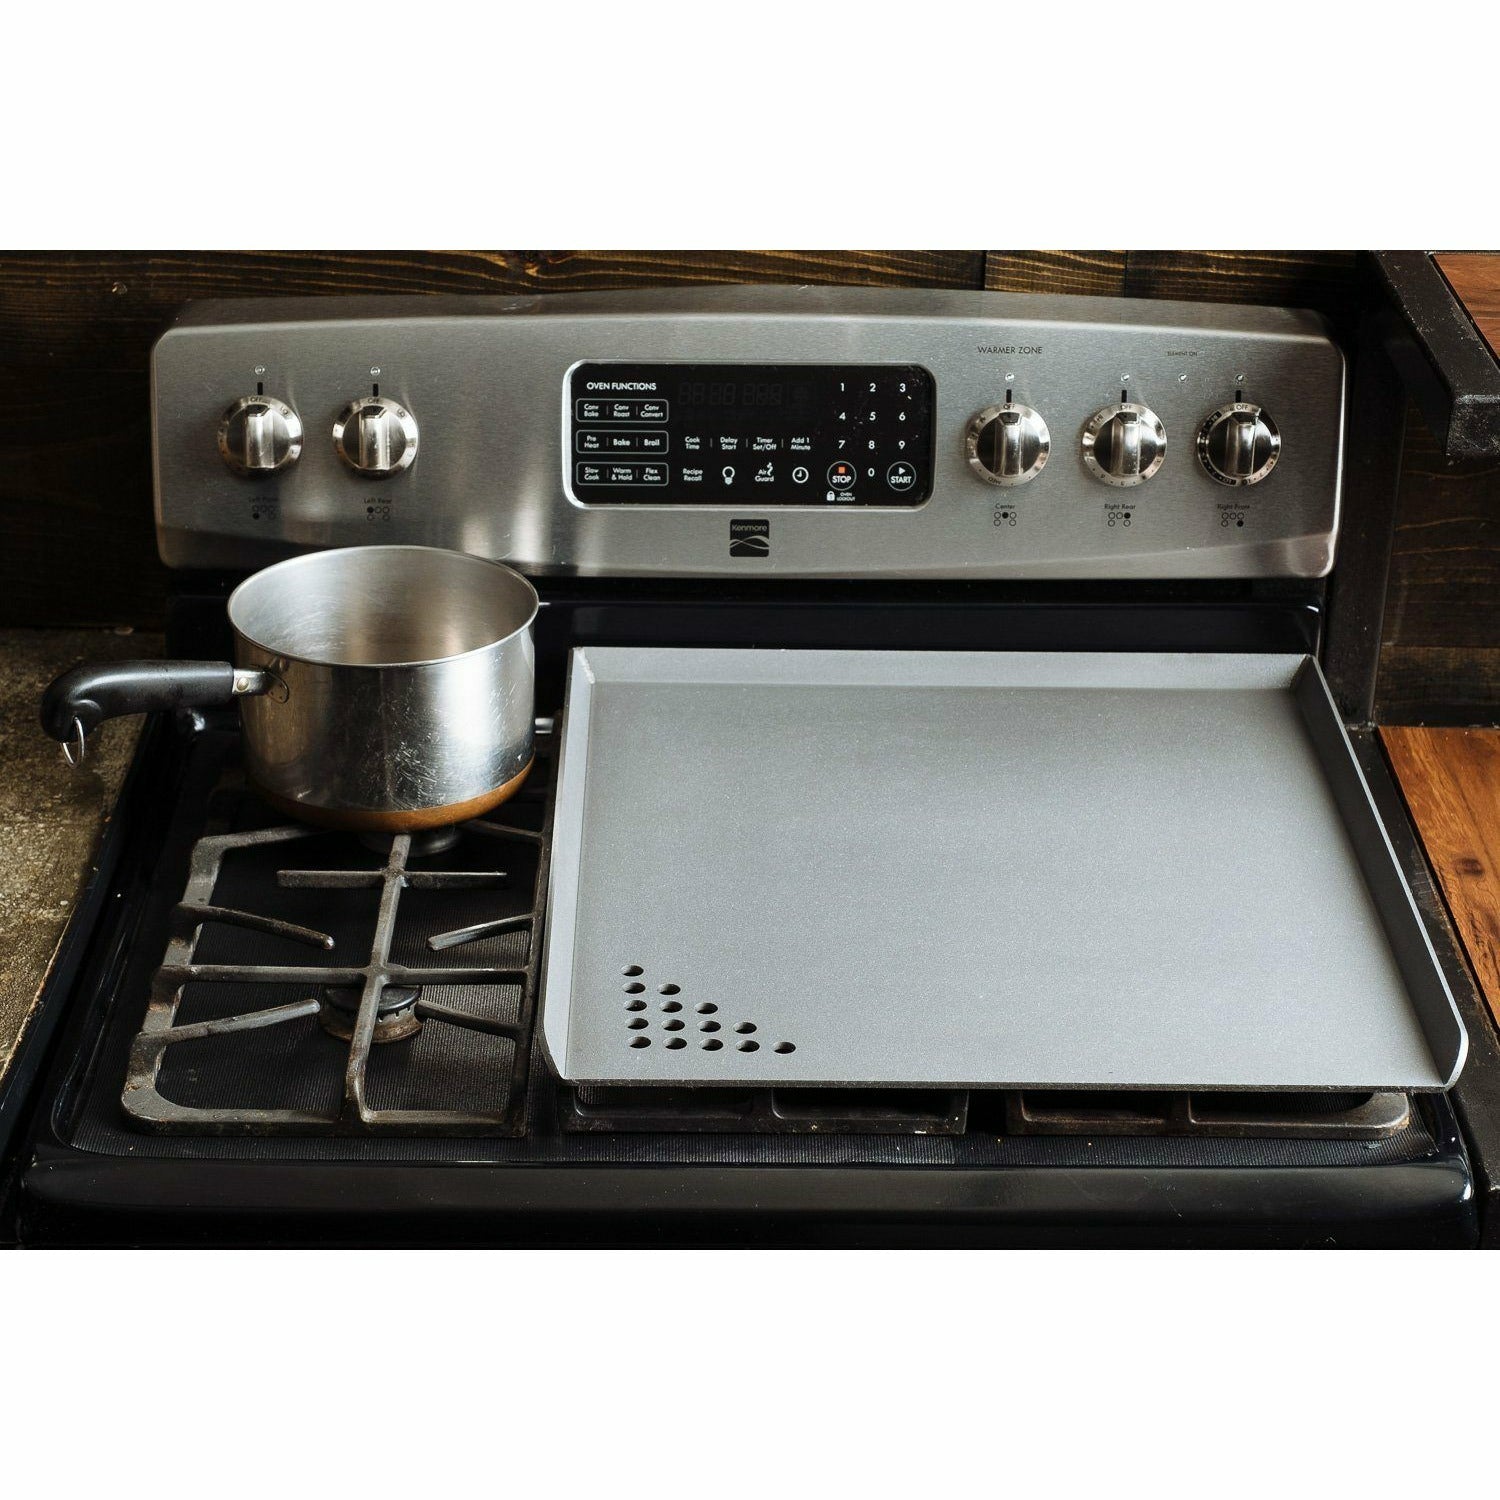 Flat Top Slim - for GAS or Electric Coil Stoves, No Sleeve / Yes Pre-Season